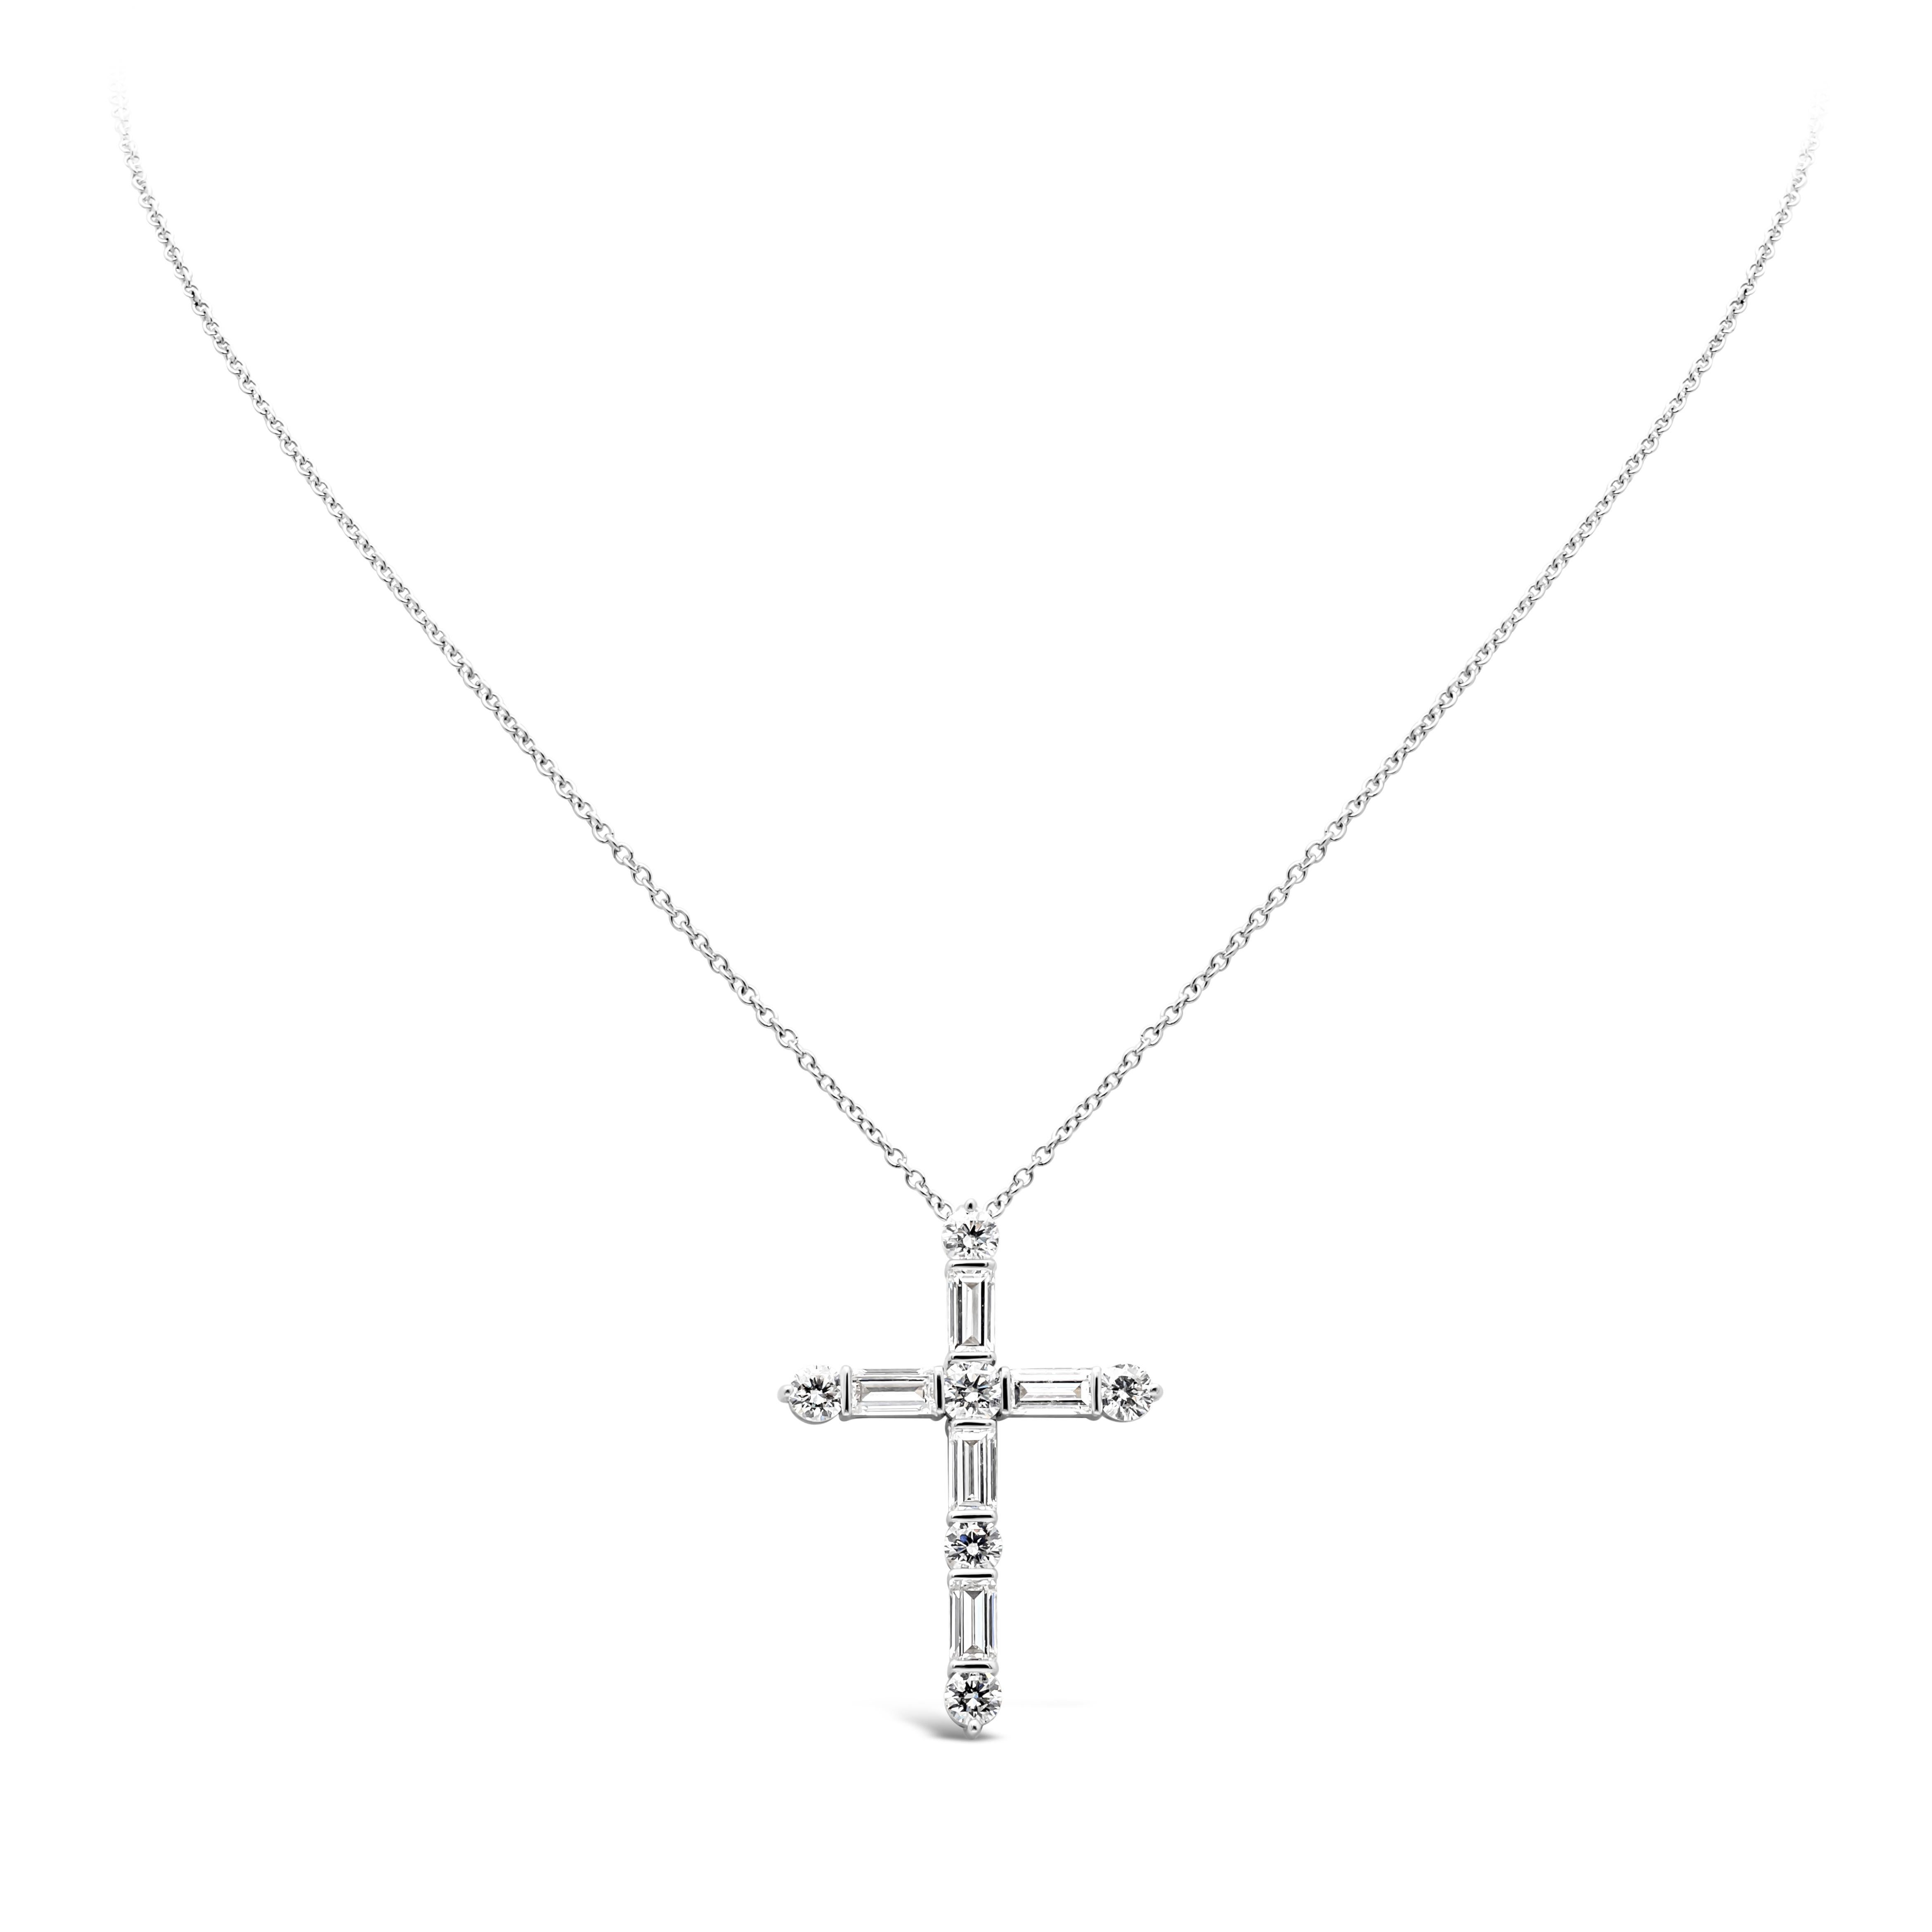 Showcasing a classic and simple religious cross pendant necklace set with baguette cut diamonds and brilliant round cut diamonds weighing 2.53 carats total, G color and VS in clarity respectively. Suspended on an adjustable 18inches white gold